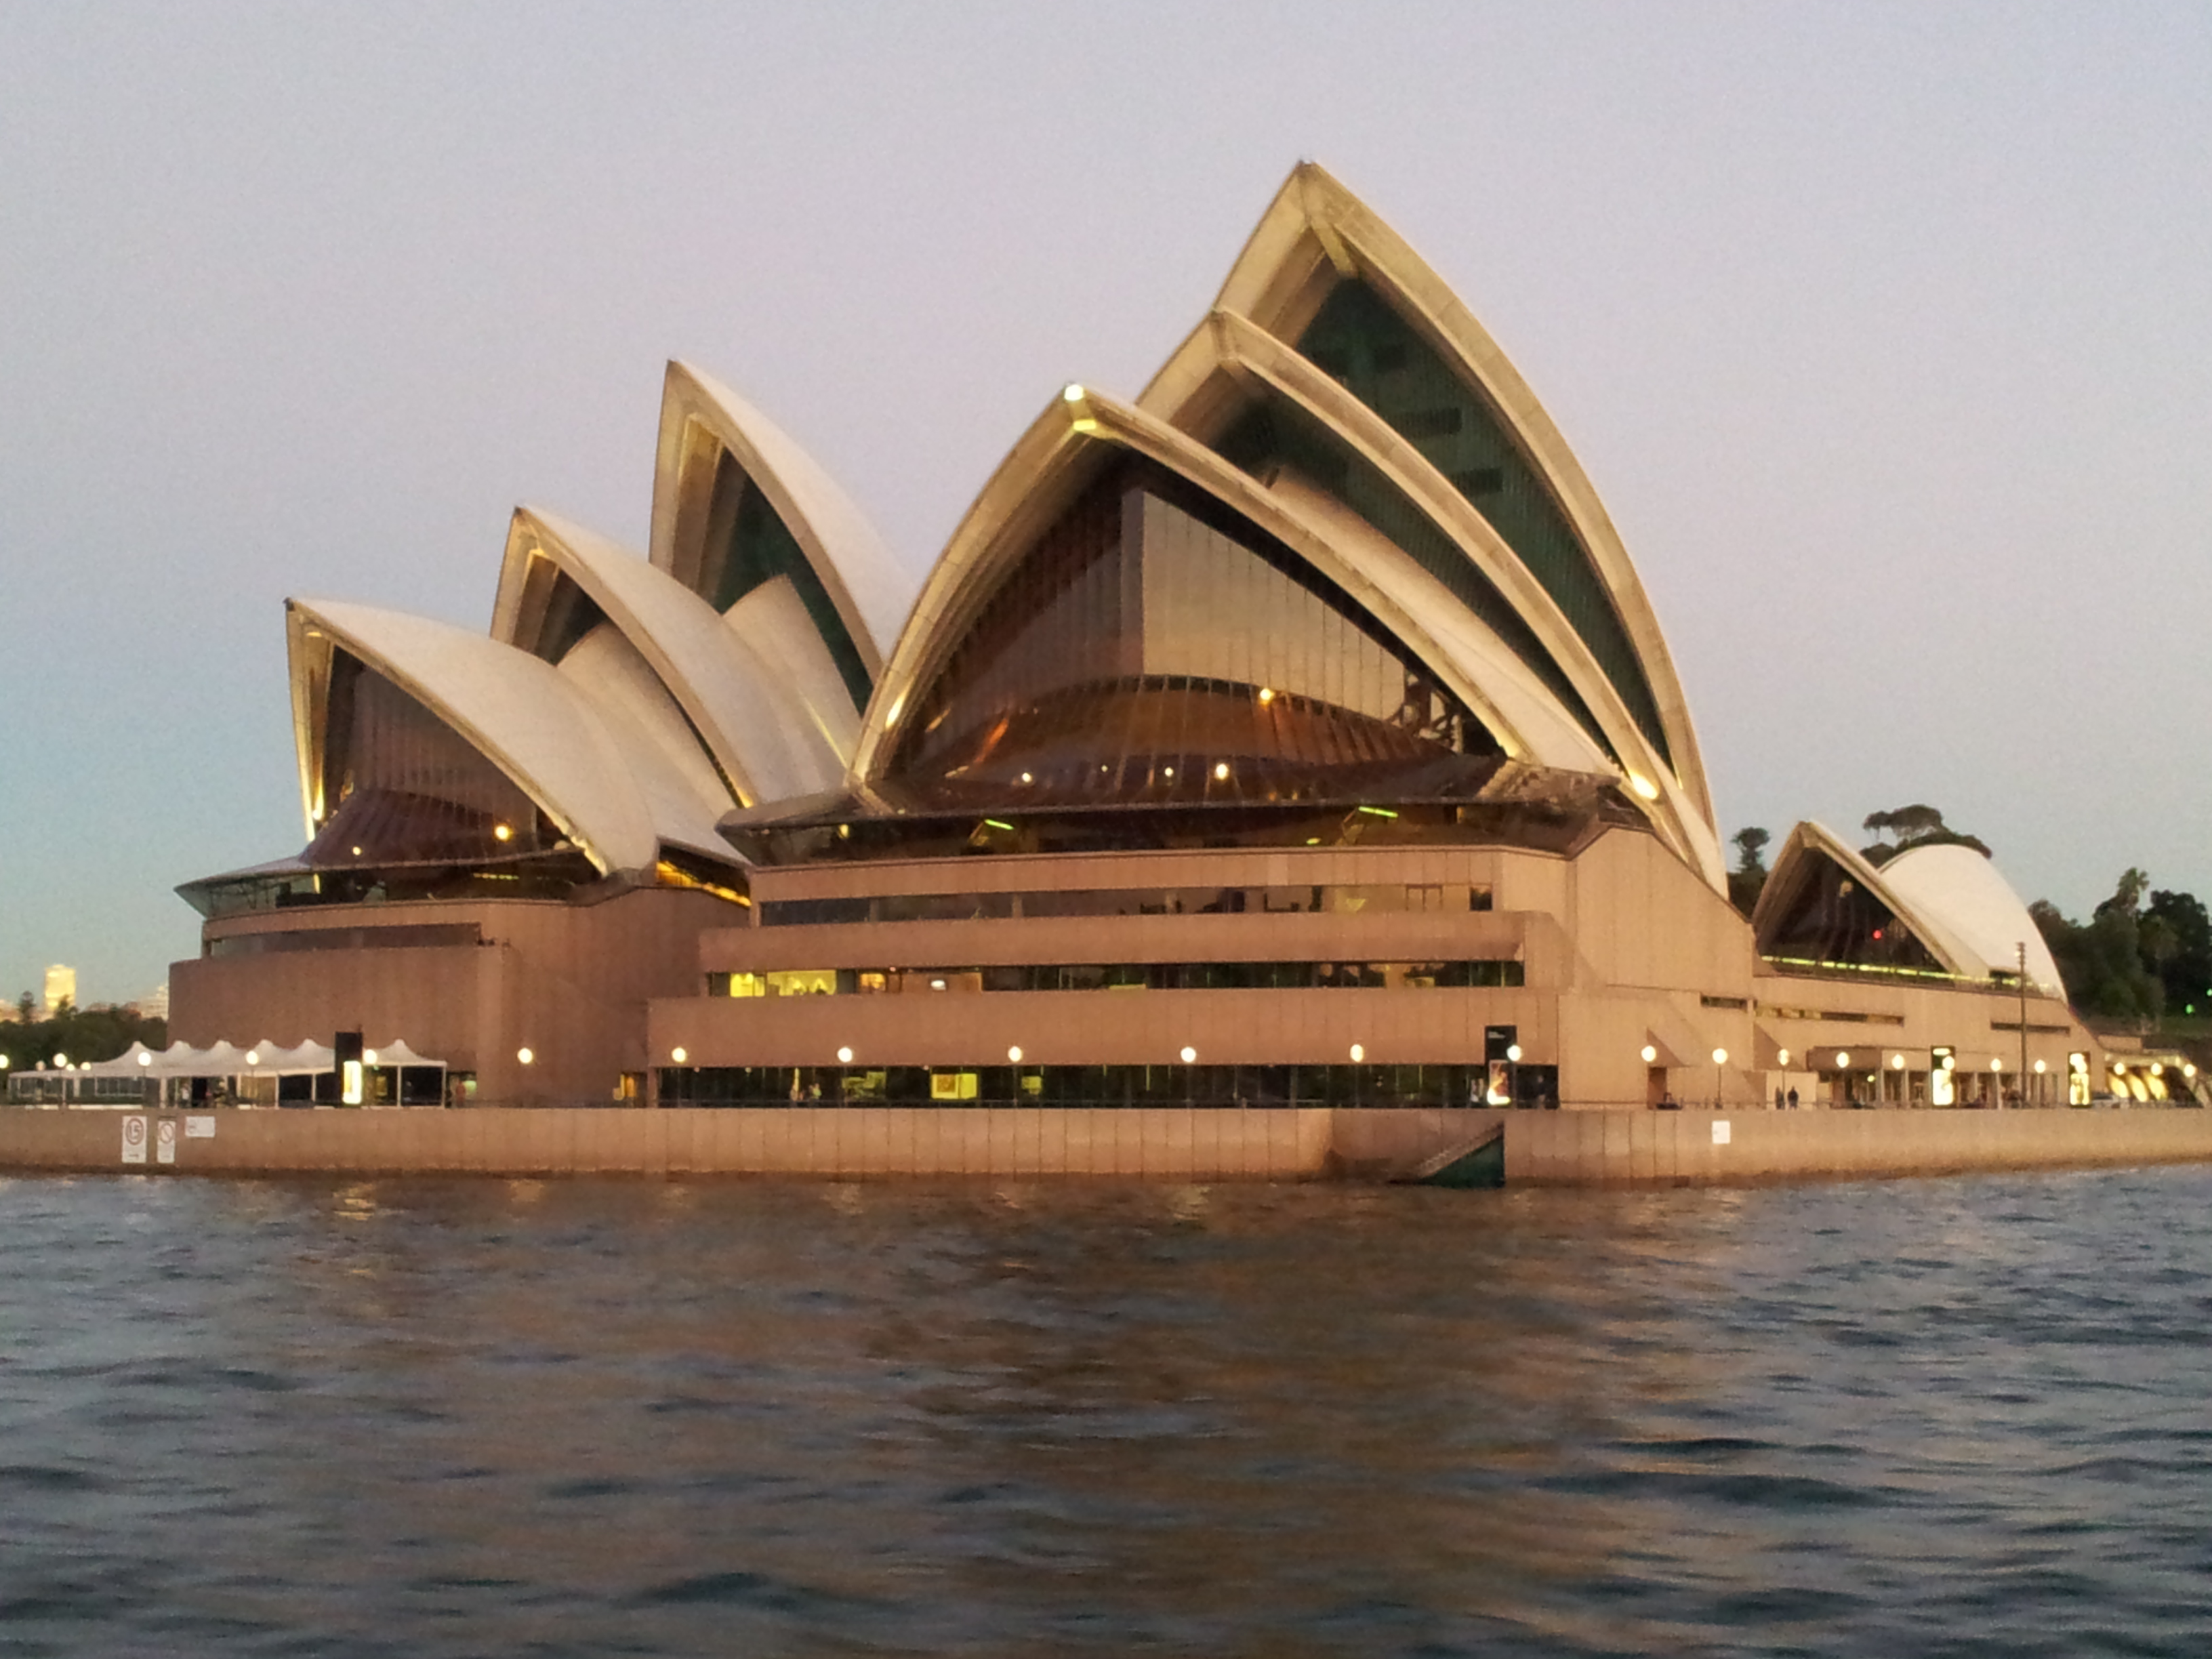 View of the Opera House from the ferry.